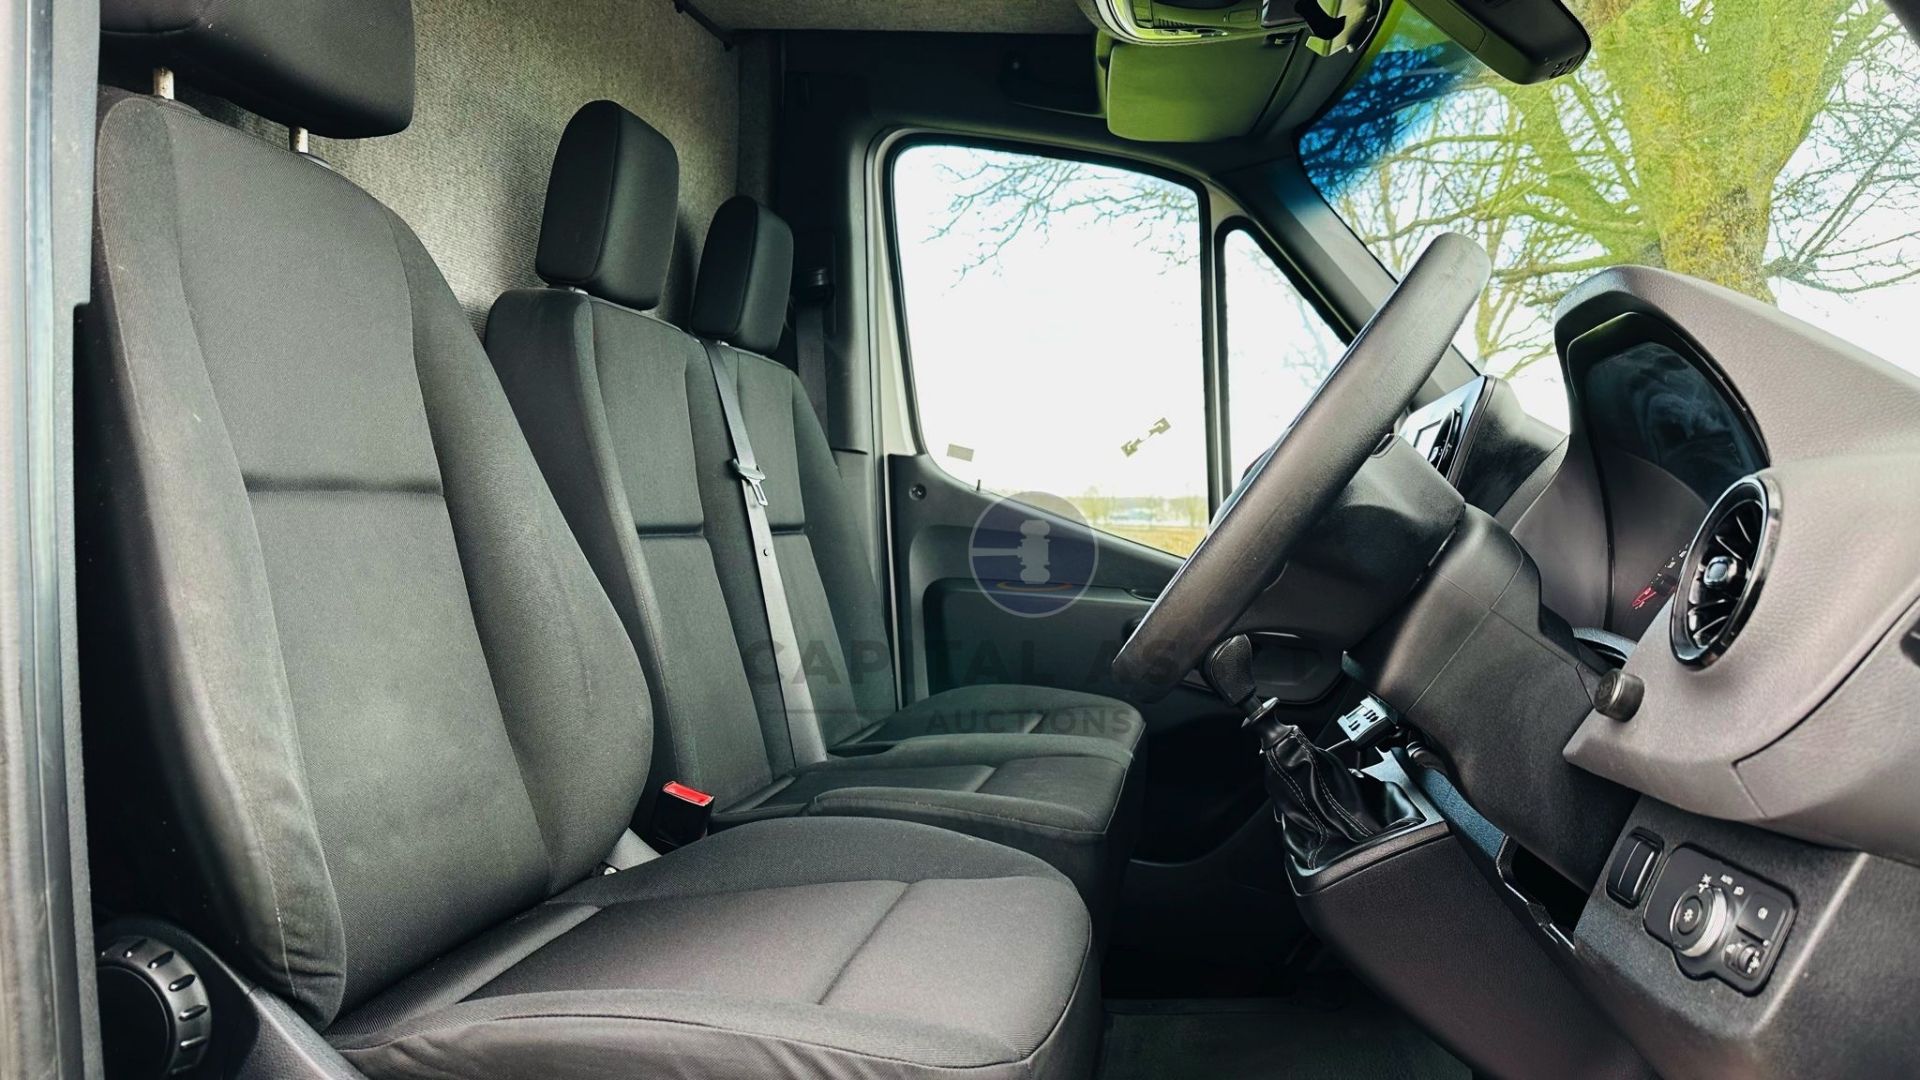 MERCEDES-BENZ SPRINTER 314 CDI *MWB - REFRIGERATED VAN* (2019 - FACELIFT MODEL) *OVERNIGHT STANDBY* - Image 26 of 41